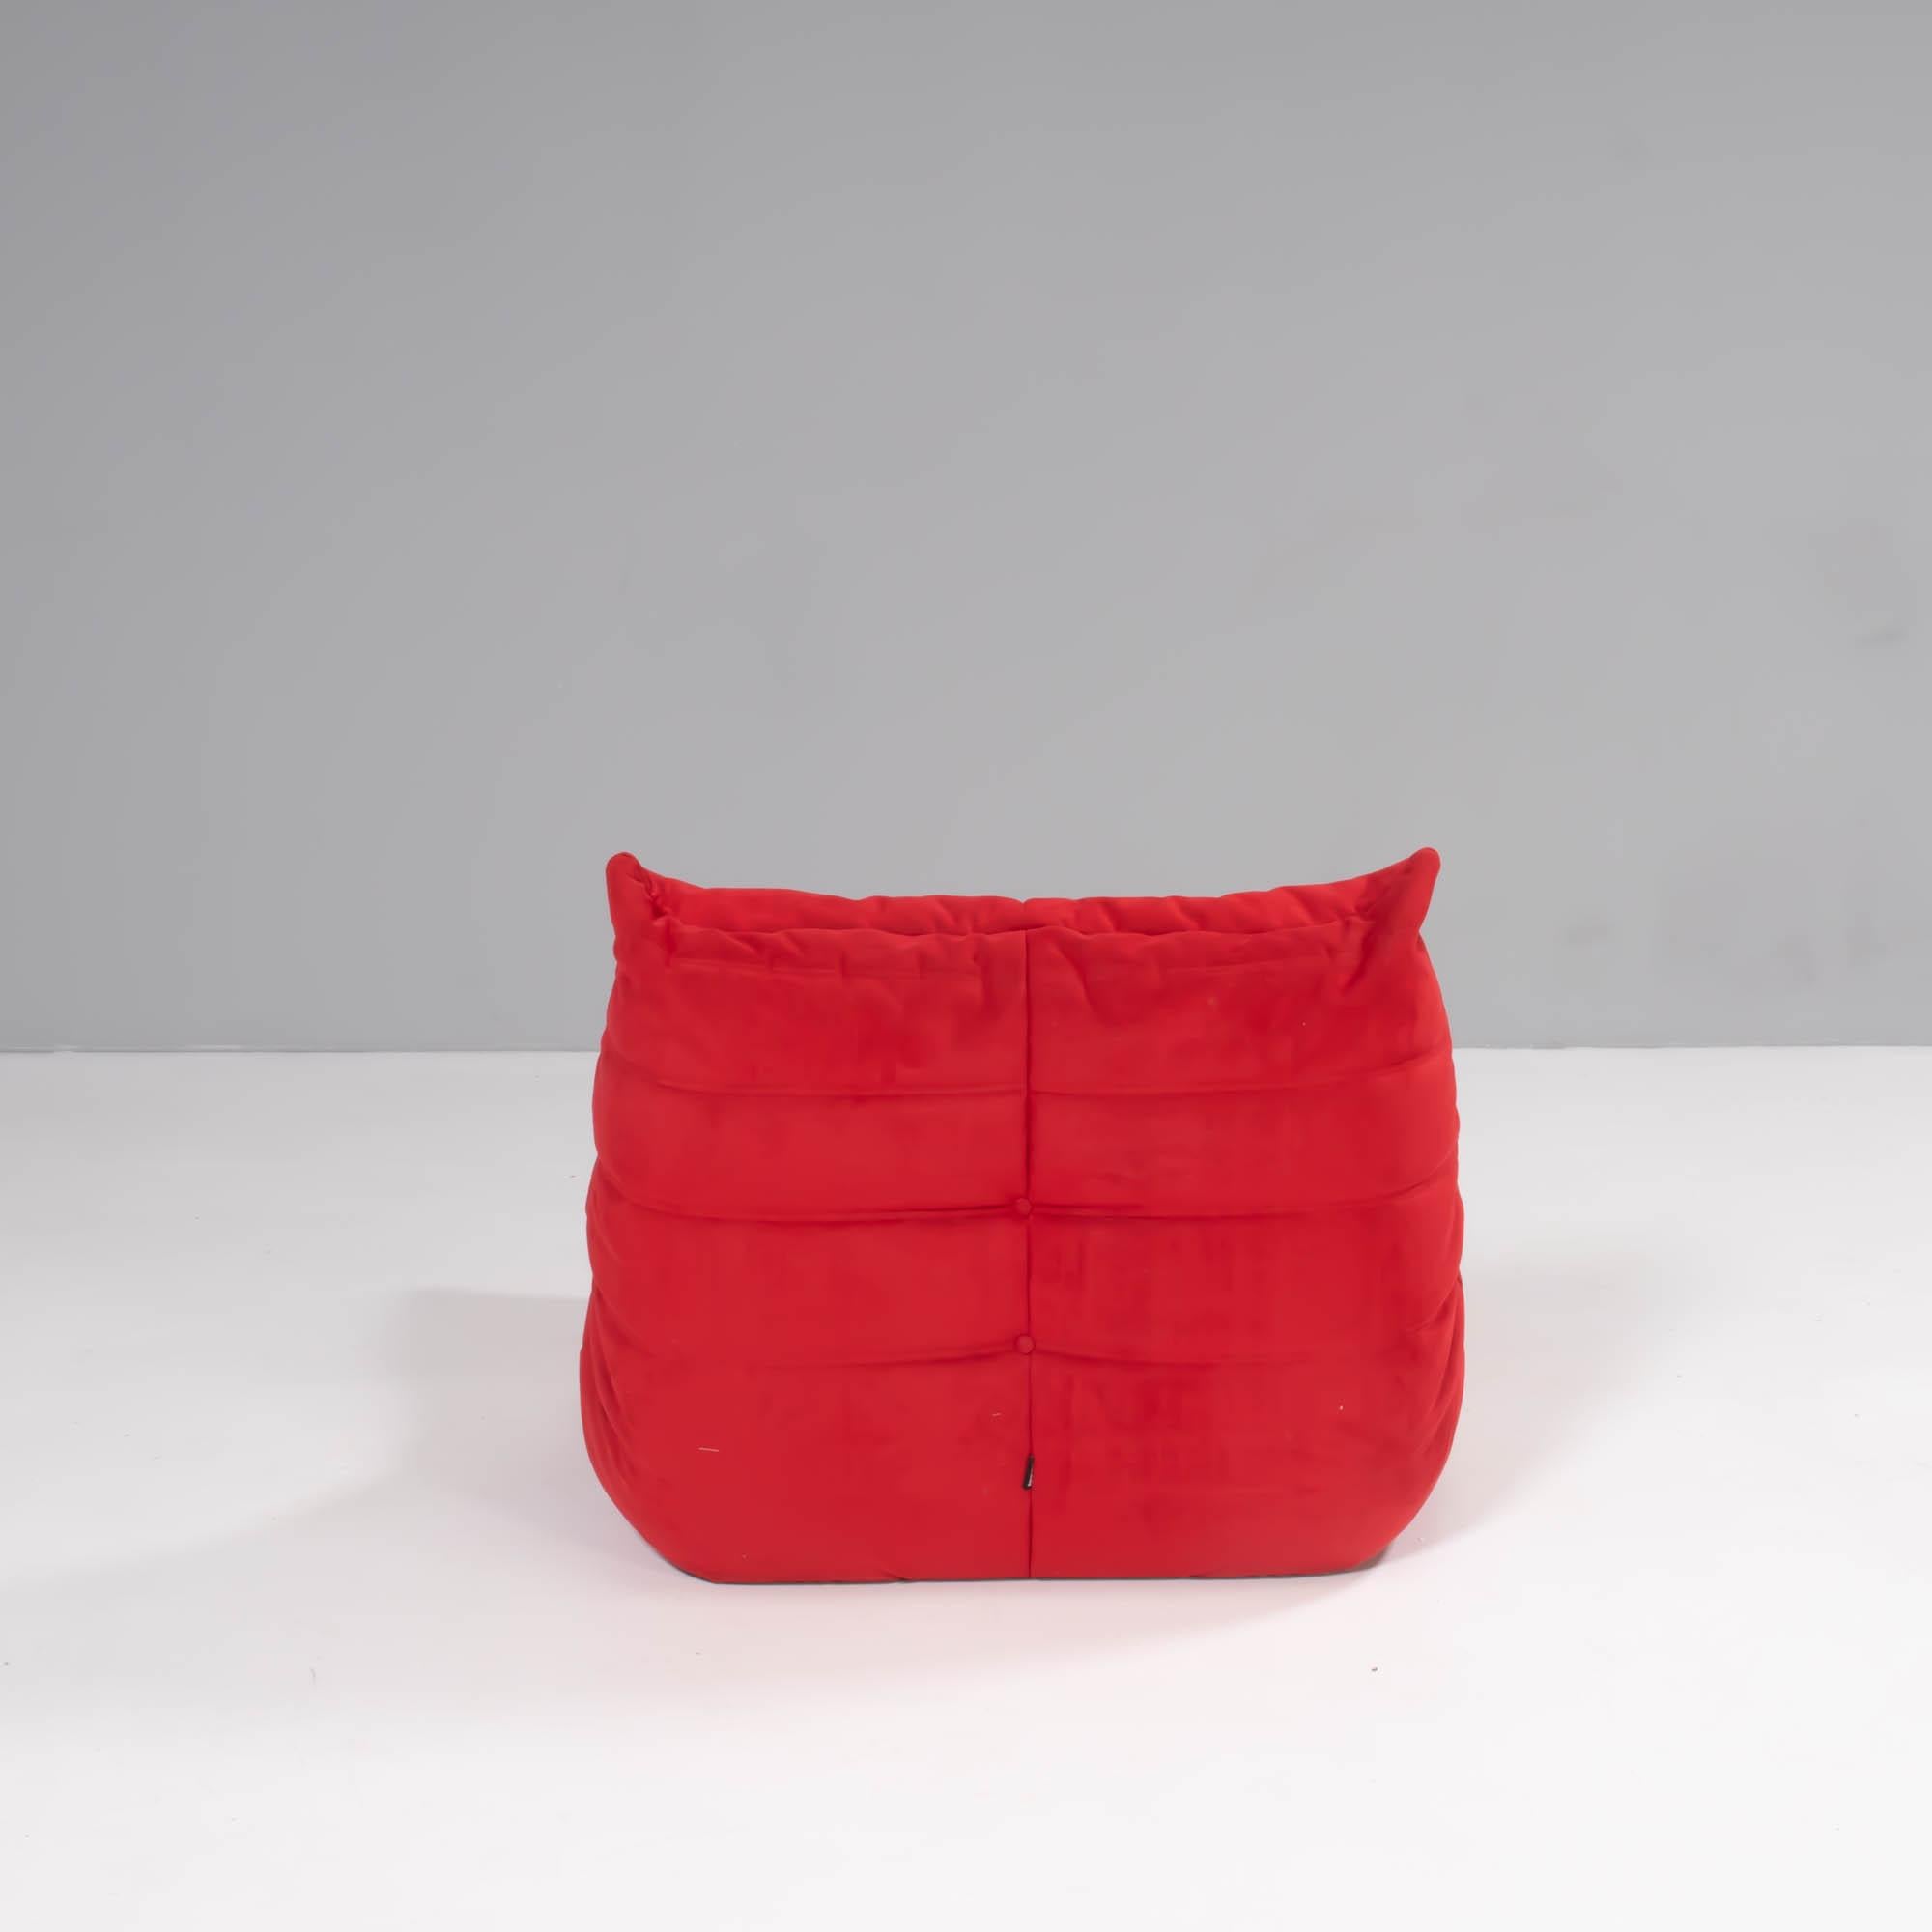 The iconic Togo sofa, originally designed by Michel Ducaroy for Ligne Roset in 1973 has become a design Classic.

The footstool features the original red Alcantara upholstery and the instantly recognizable pleated fabric design, which gives the